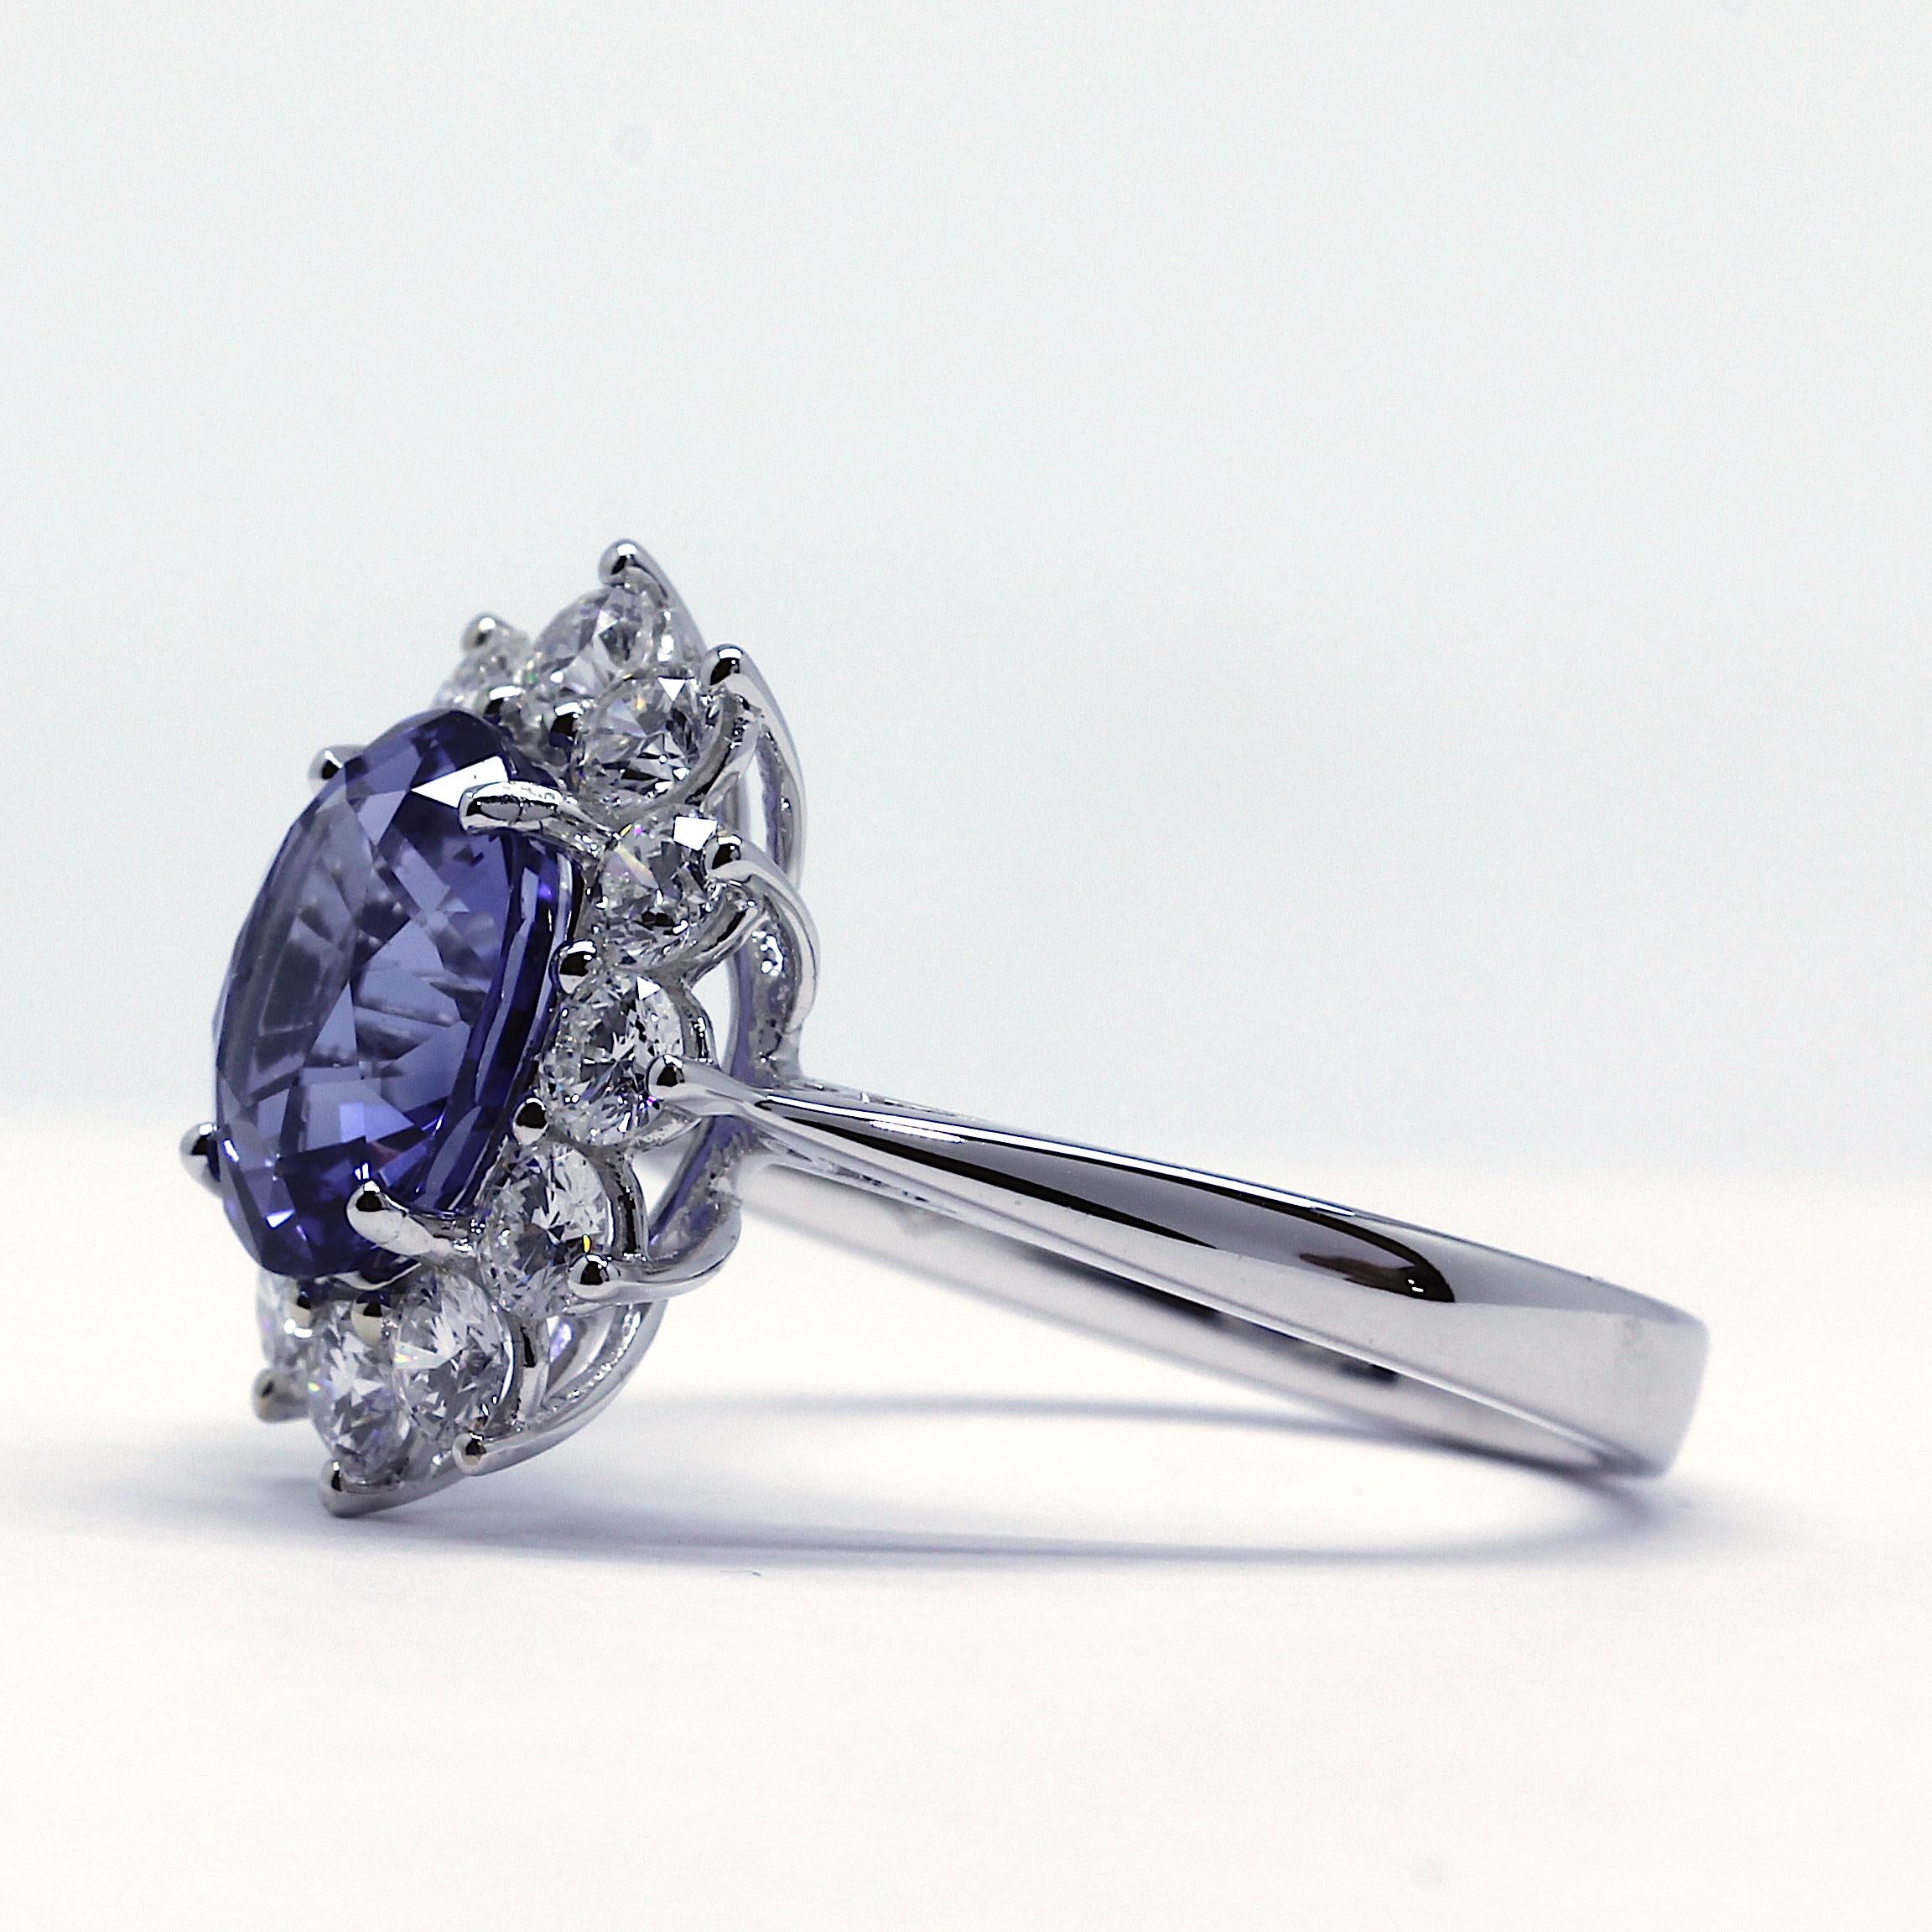 We all remember the beautiful Sapphire ring Princess Diana wore. Now you can wear one yourself. This exquisite piece was made in 18 Karat white gold. In the center a 3.34 Carat Sapphire enveloped by 1.10 Carat clear, sparkling white diamonds. This